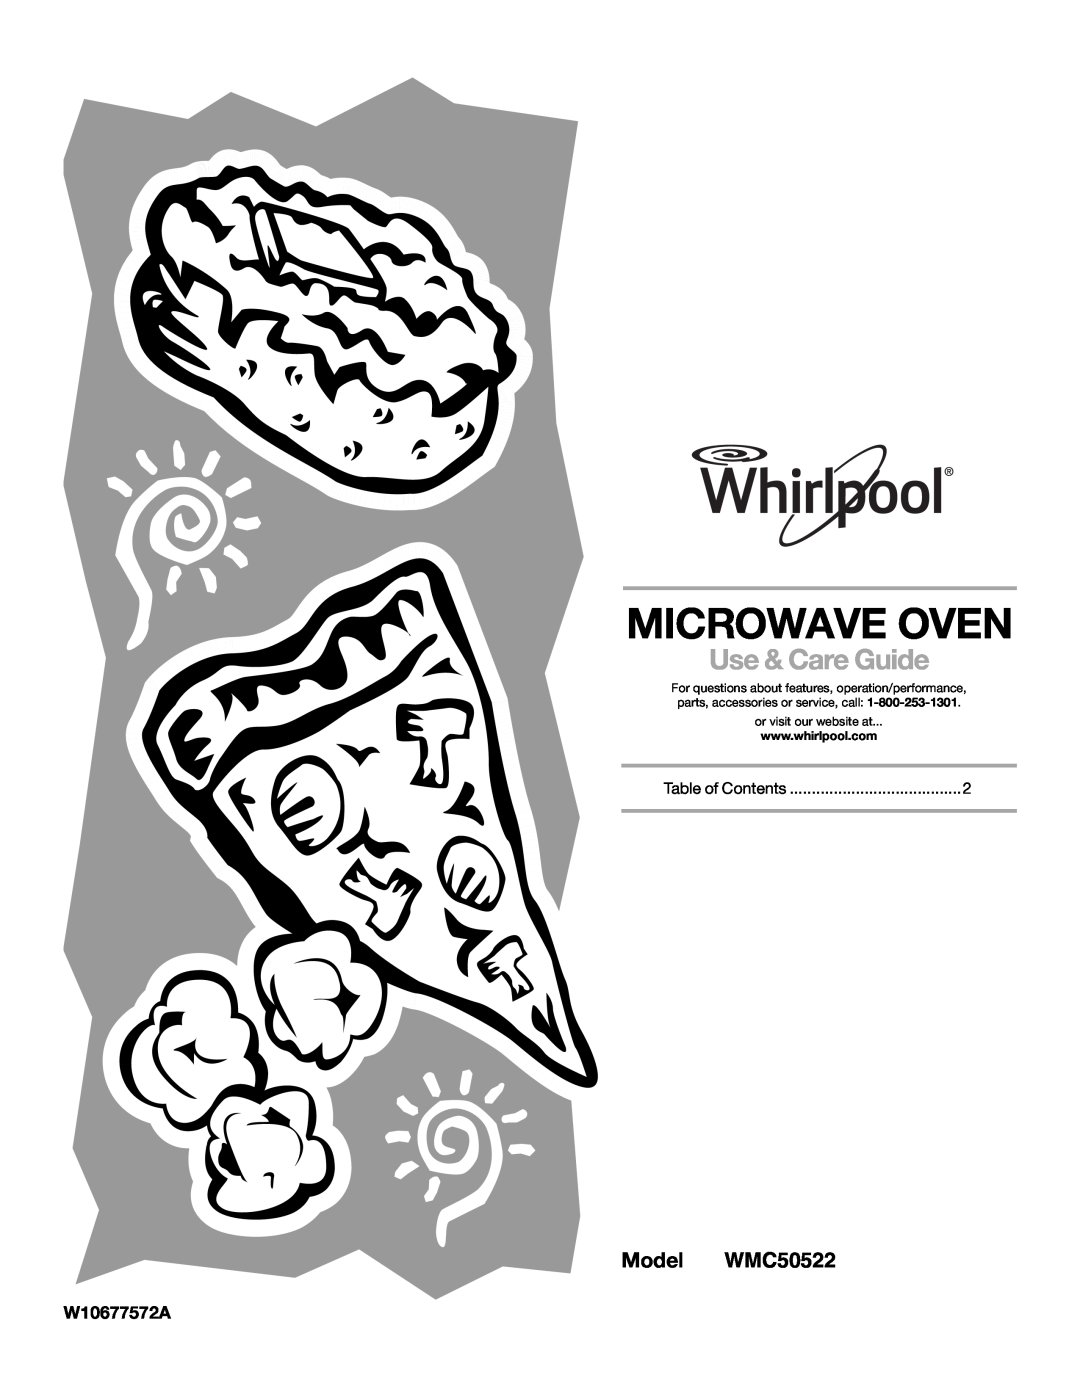 Whirlpool manual Model WMC50522, Microwave Oven, Use & Care Guide, or visit our website at 